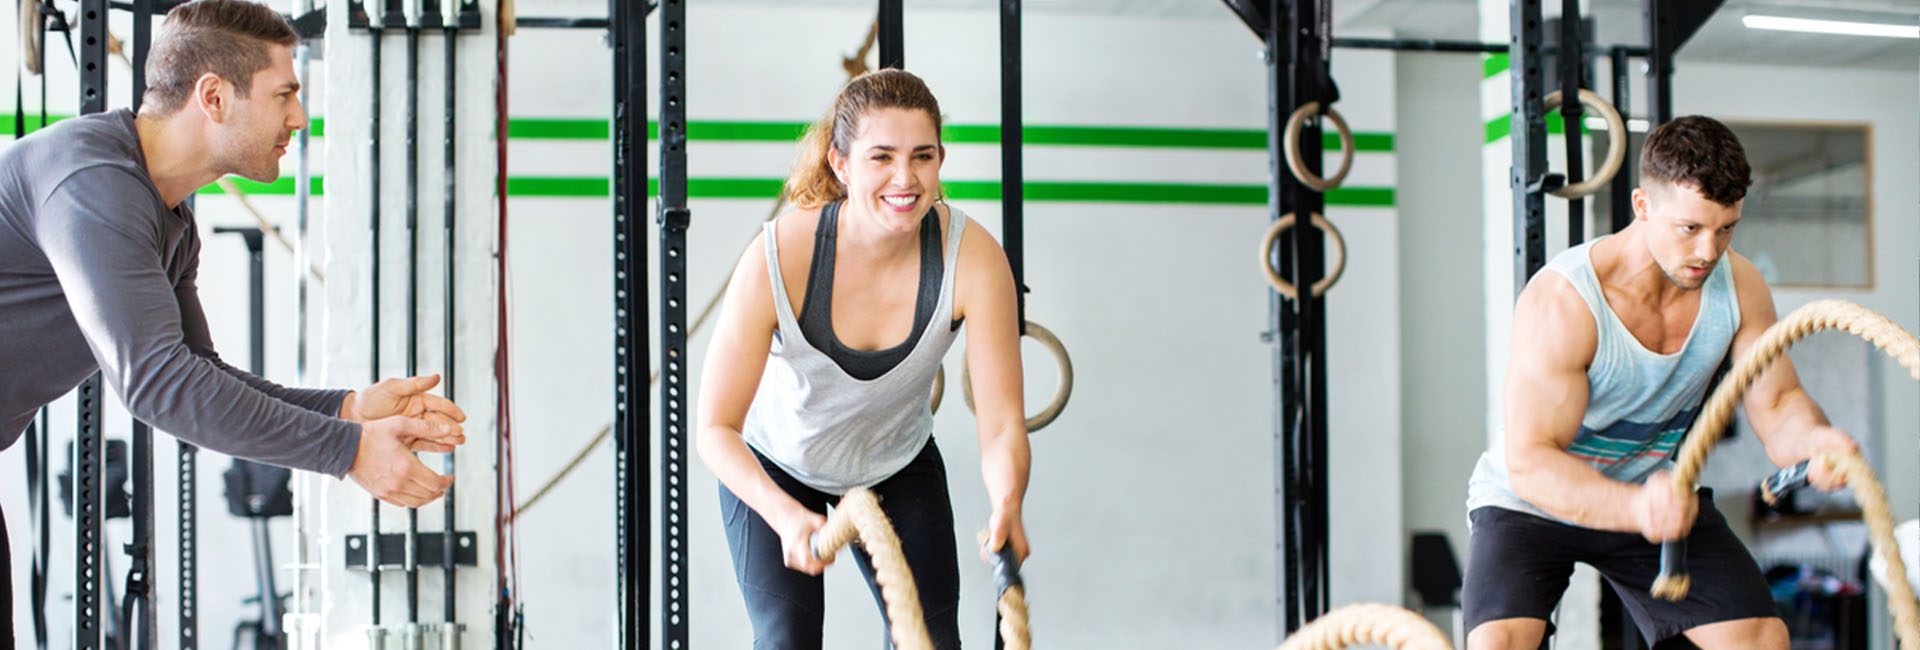 women working out with battle ropes